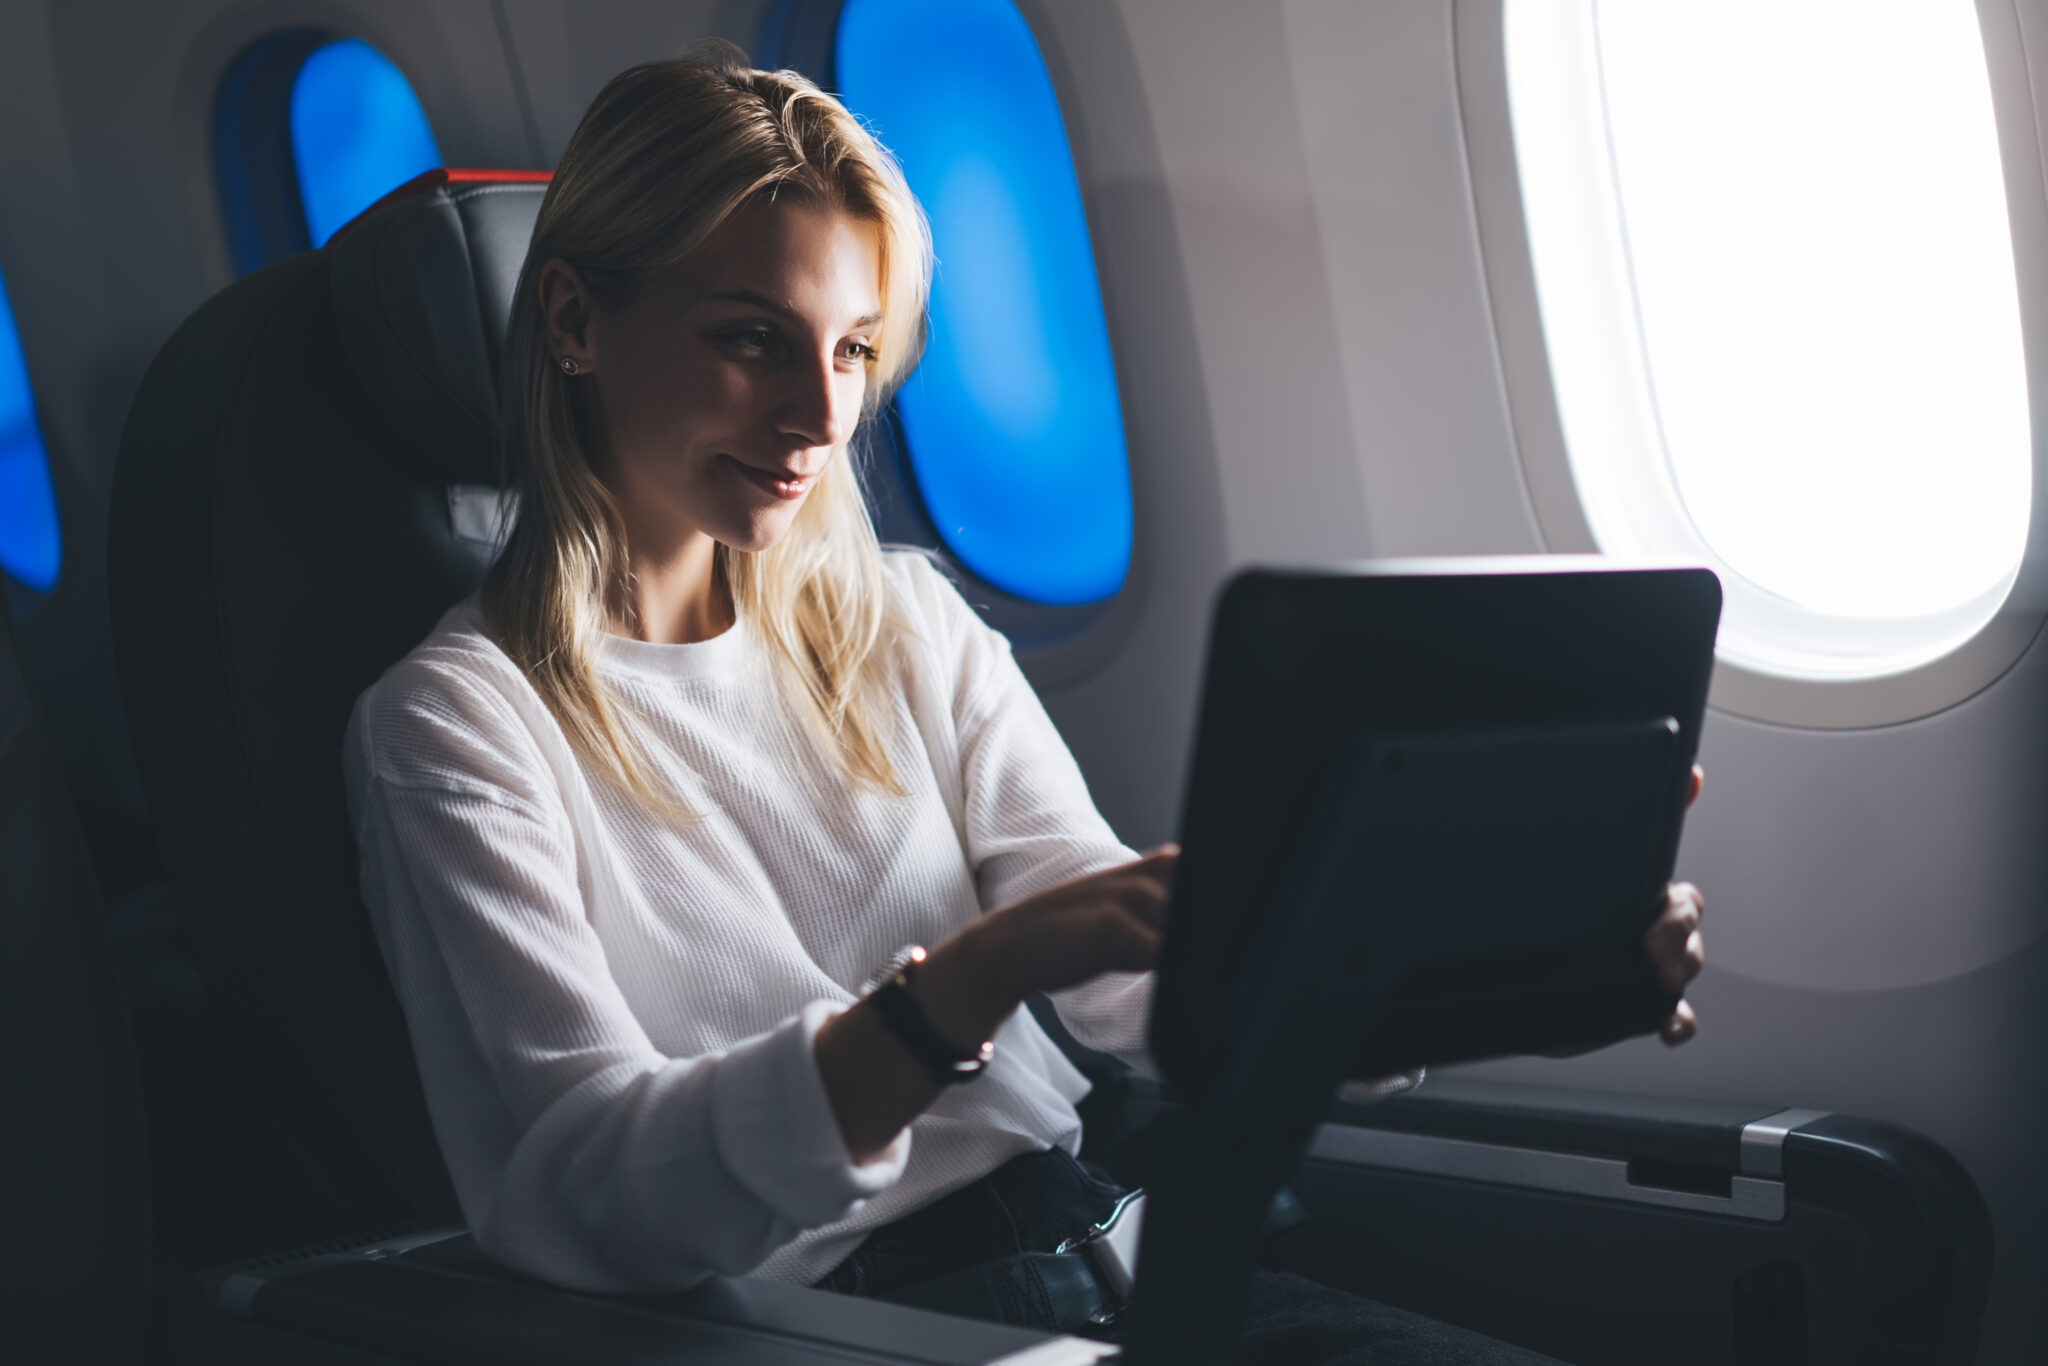 Lovely Caucasian girl passenger touching a handy LCD screen while selecting entertainment during a relaxing flight.  Play games, shop shopping, personal TV and movie selection on board